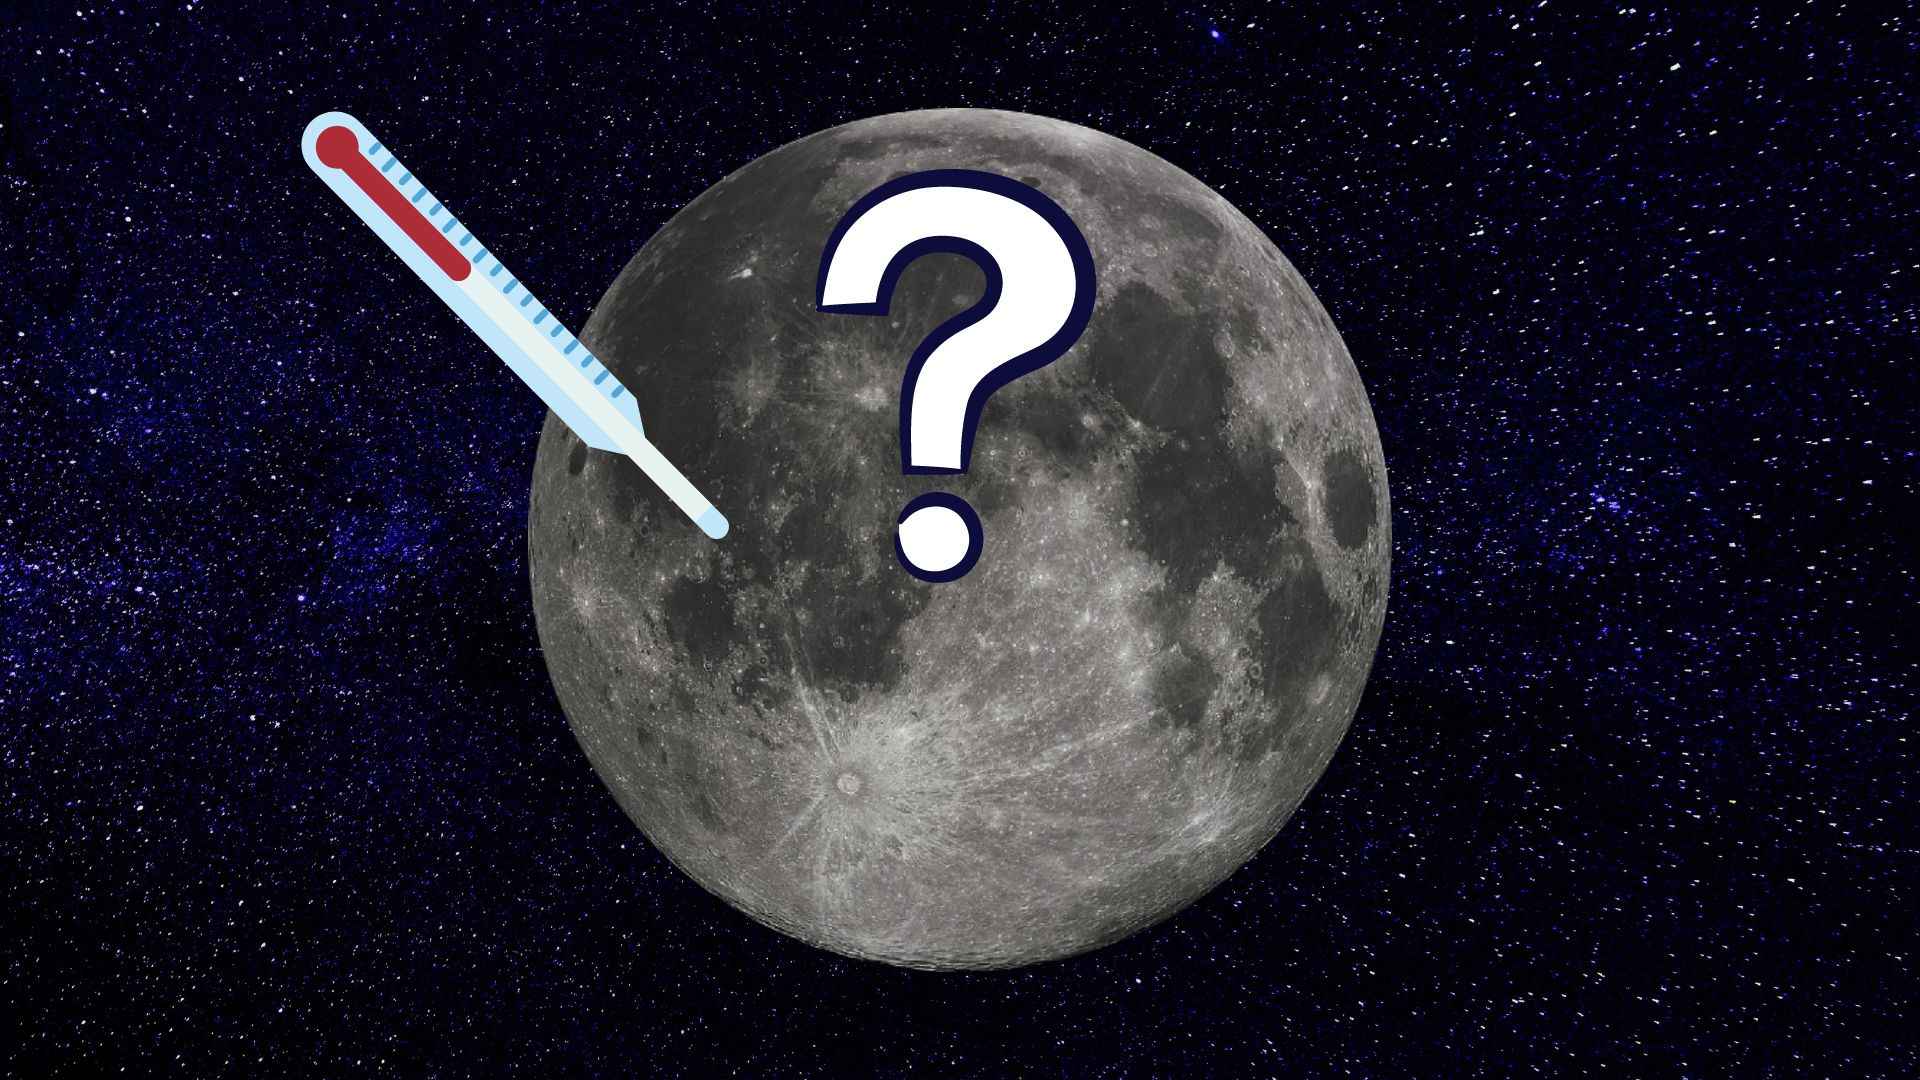 What is the temperature on the moon?